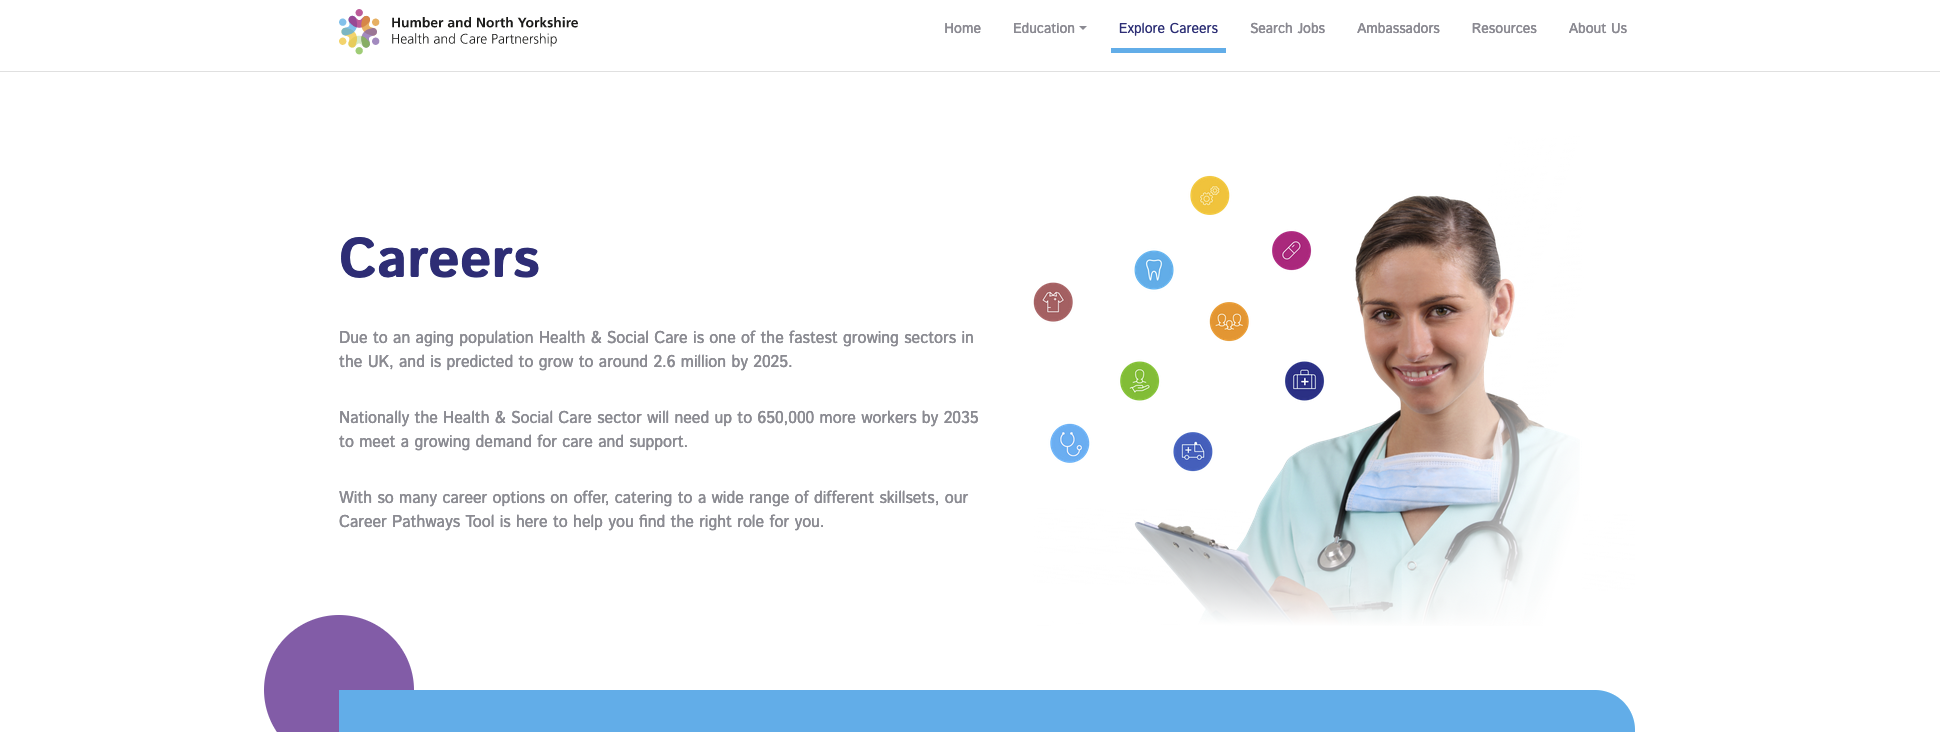 screenshot humber and north yorkshire health and care partnrship website page on careers